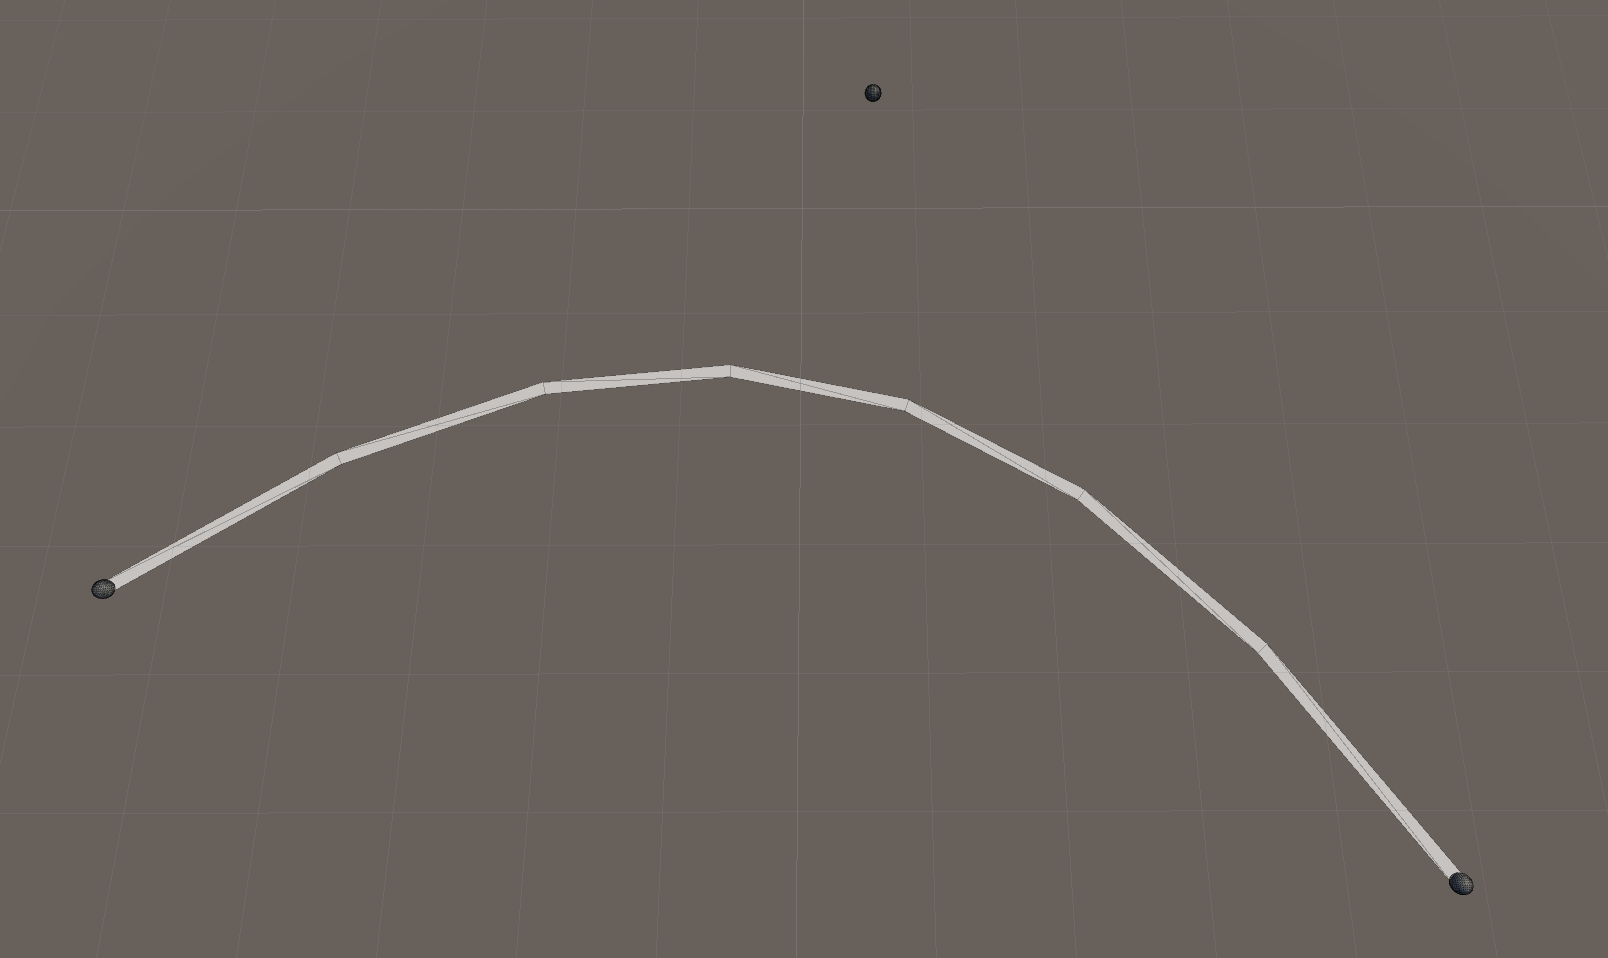 Bezier approximation